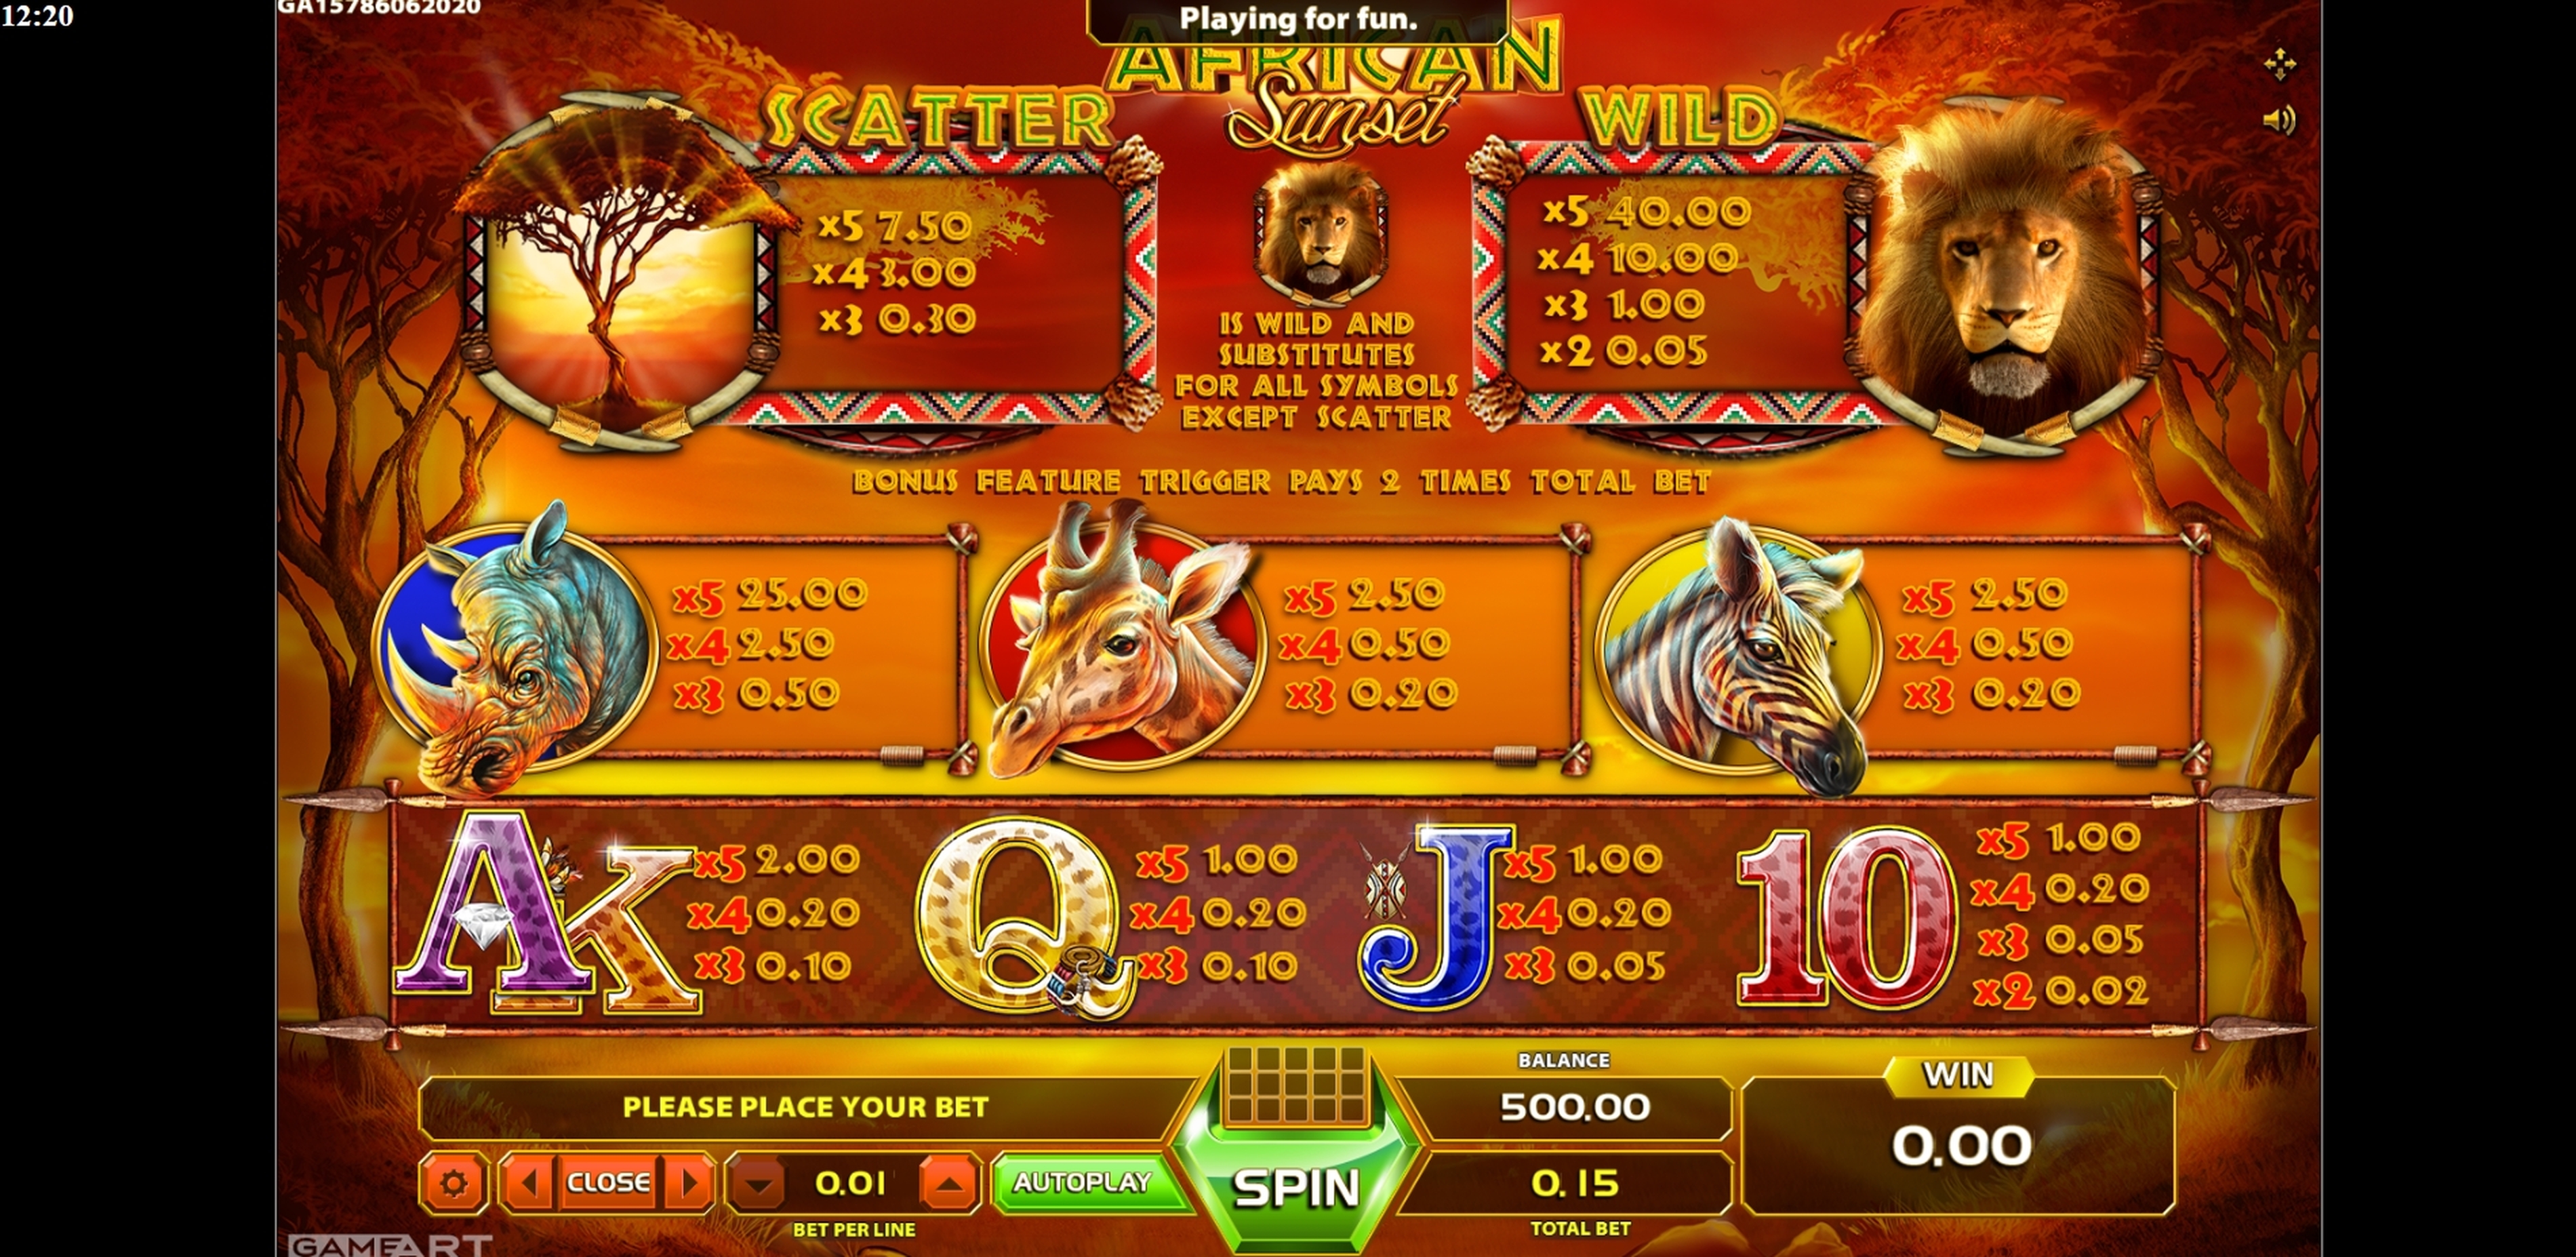 Info of African Sunset Slot Game by GameArt